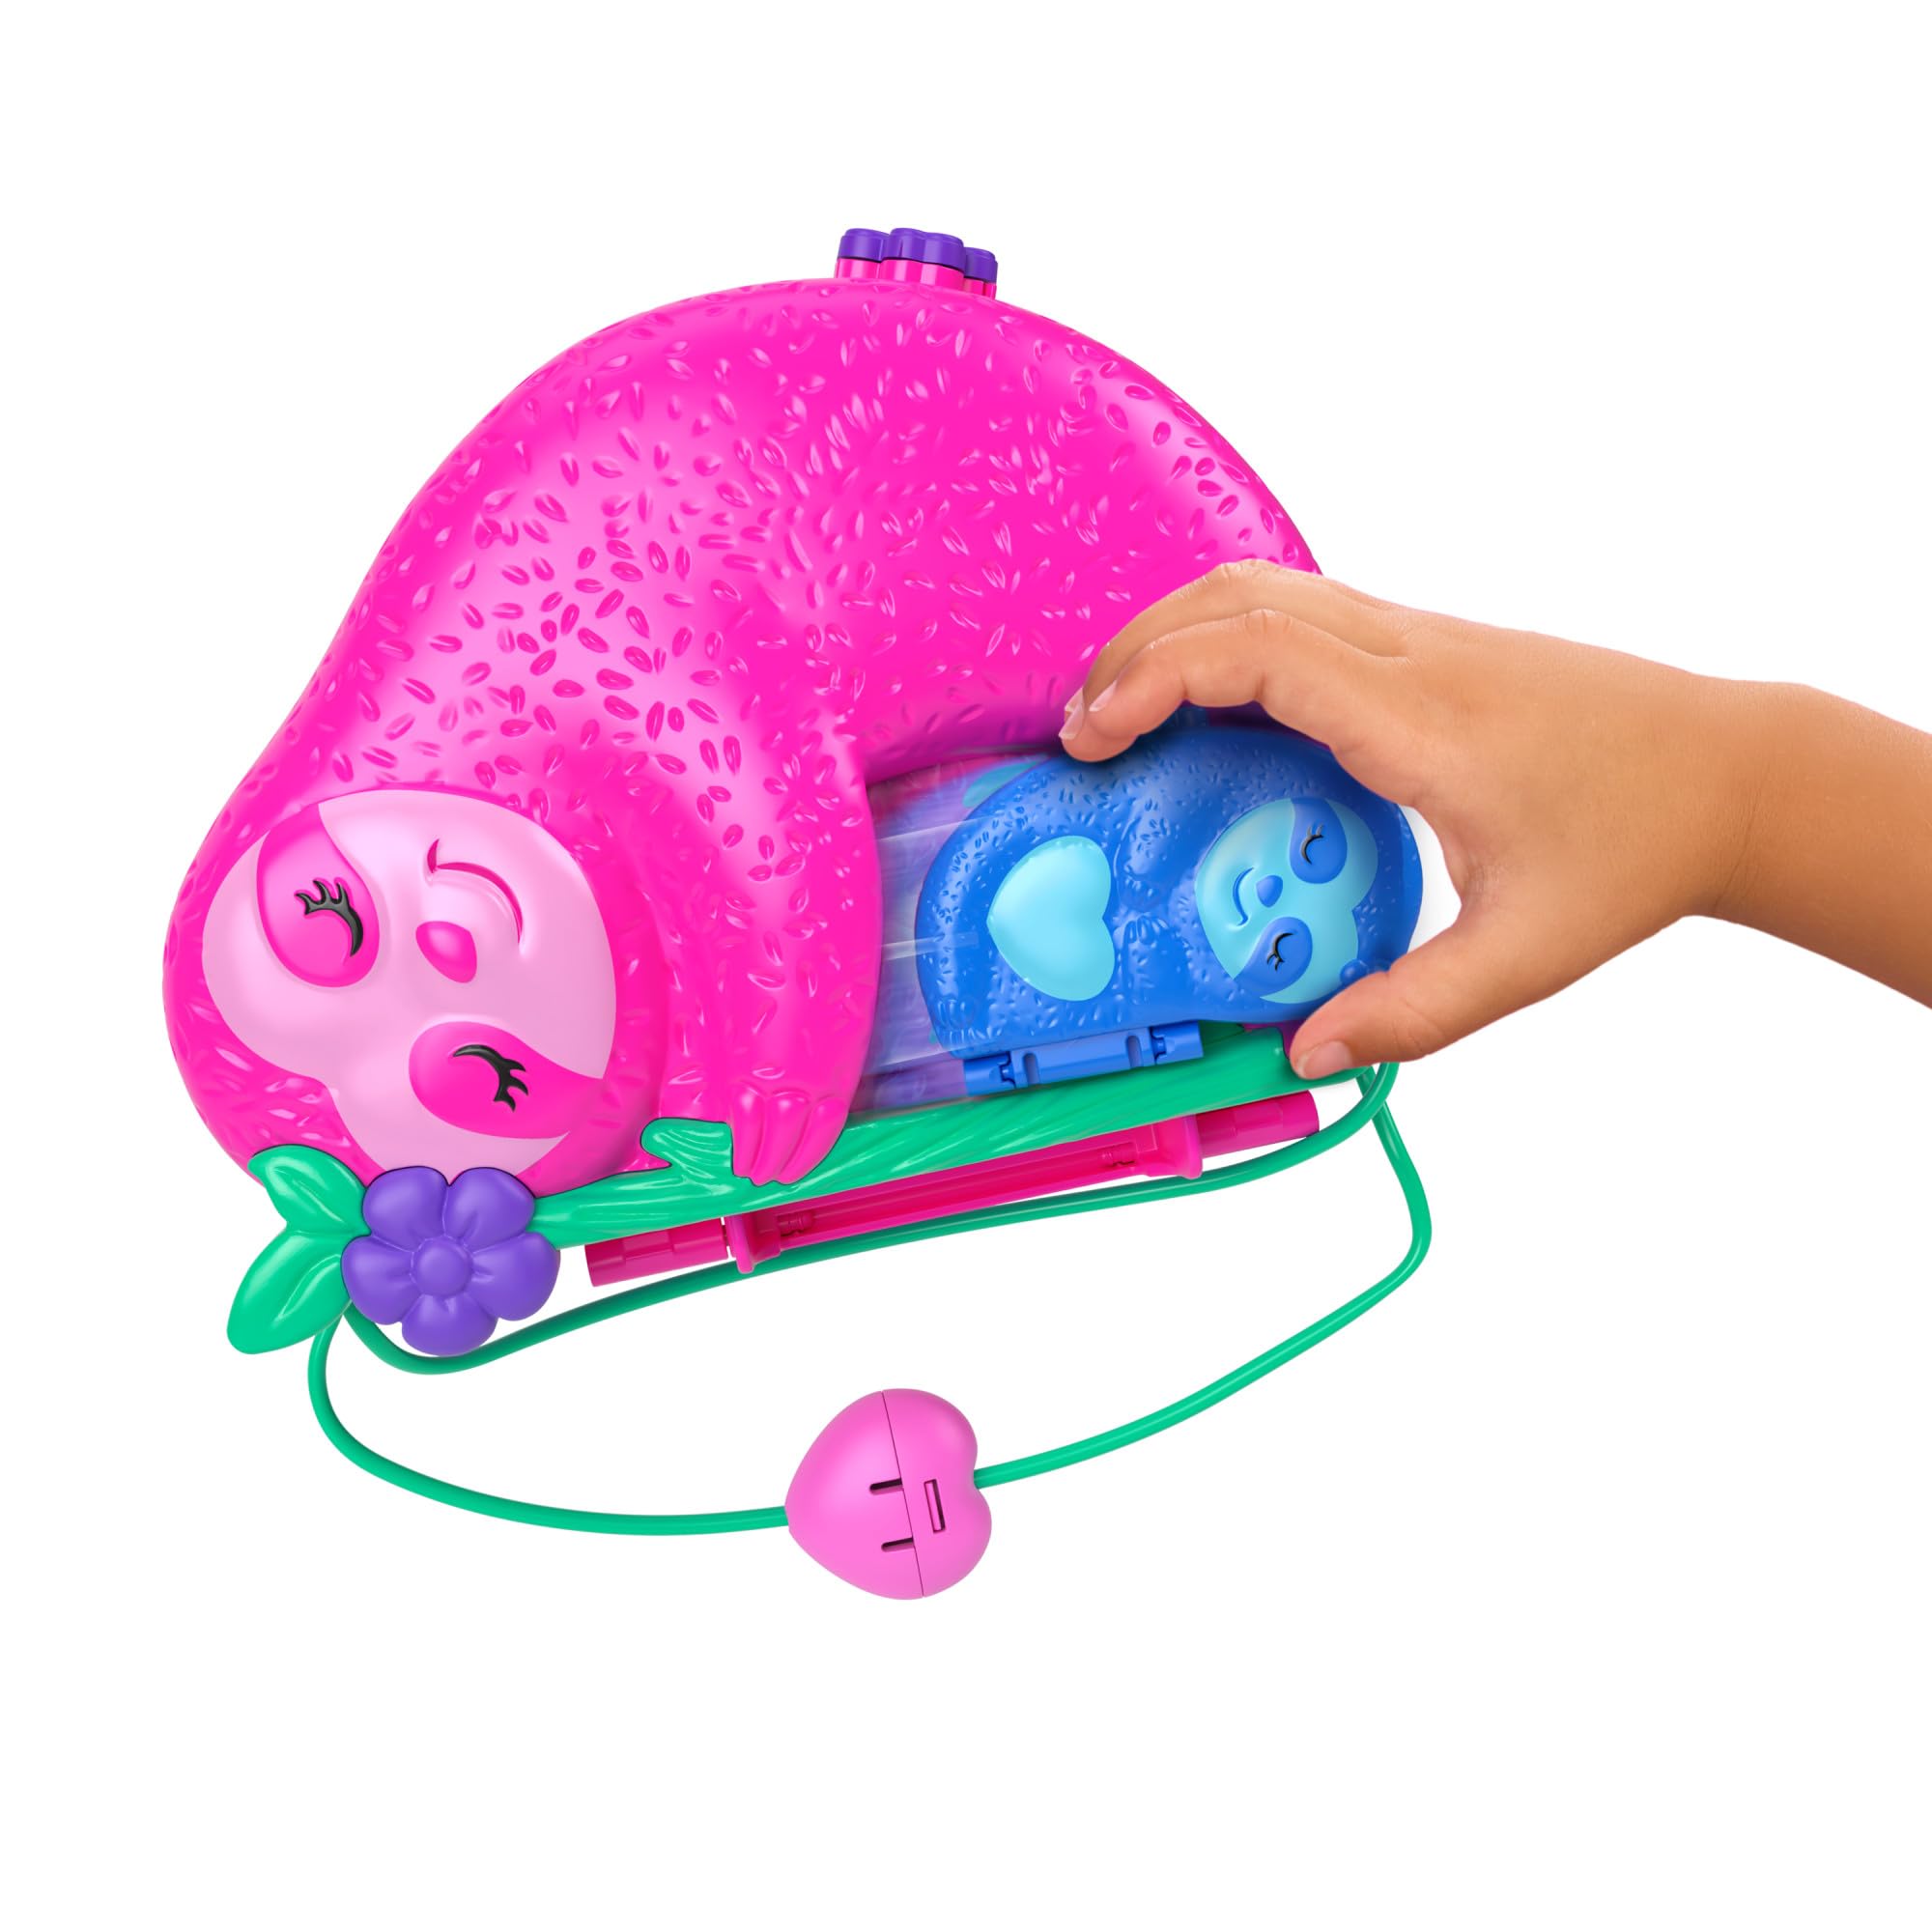 Polly Pocket Playset and Travel Toy with 2 Micro Dolls, Animal Toy, Sloth 2-in-1 Purse Compact